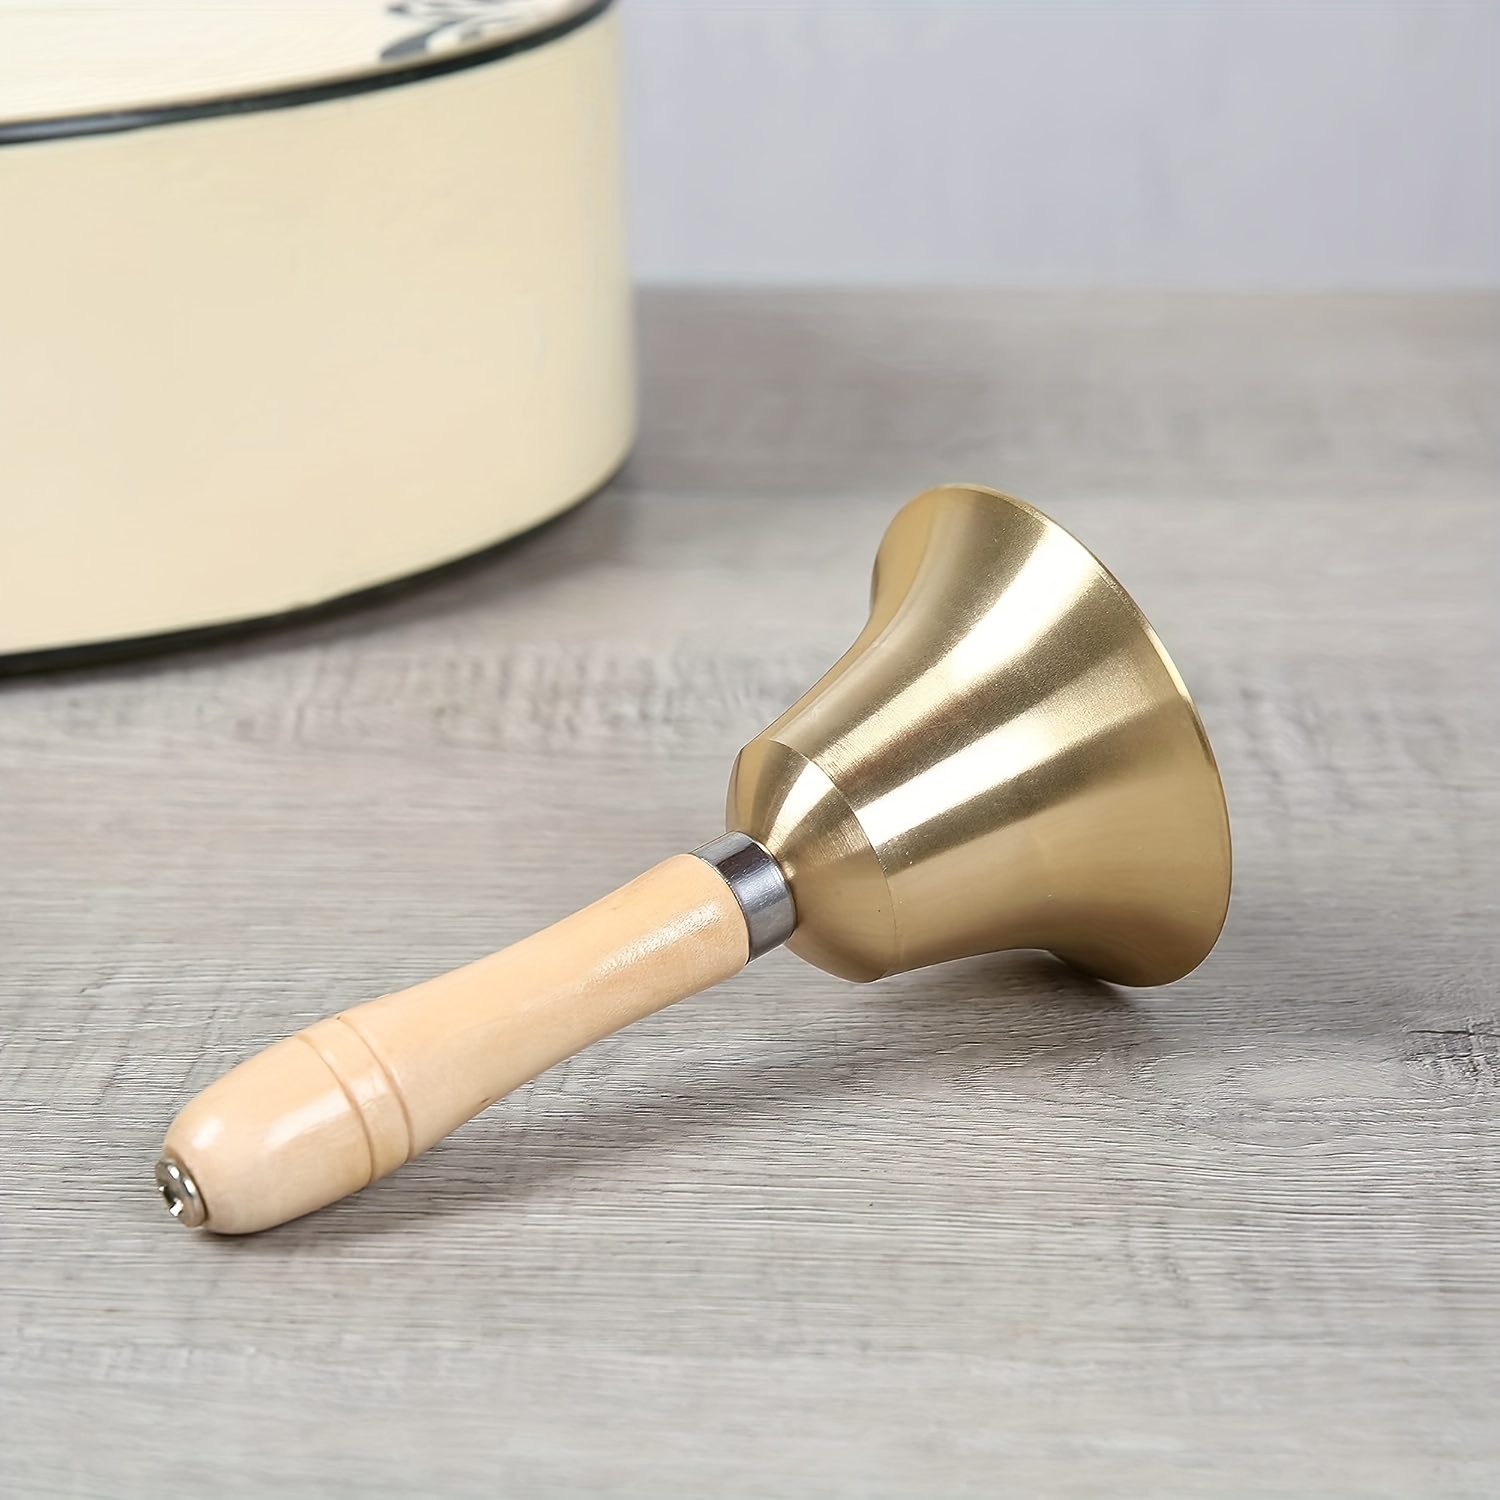 Sopcone Hand Bell Extra Loud Solid Brass Call Bell Handbells with Wooden  Handle Multi-Purpose for School, Churchl, Hotel, Christmas and Wedding